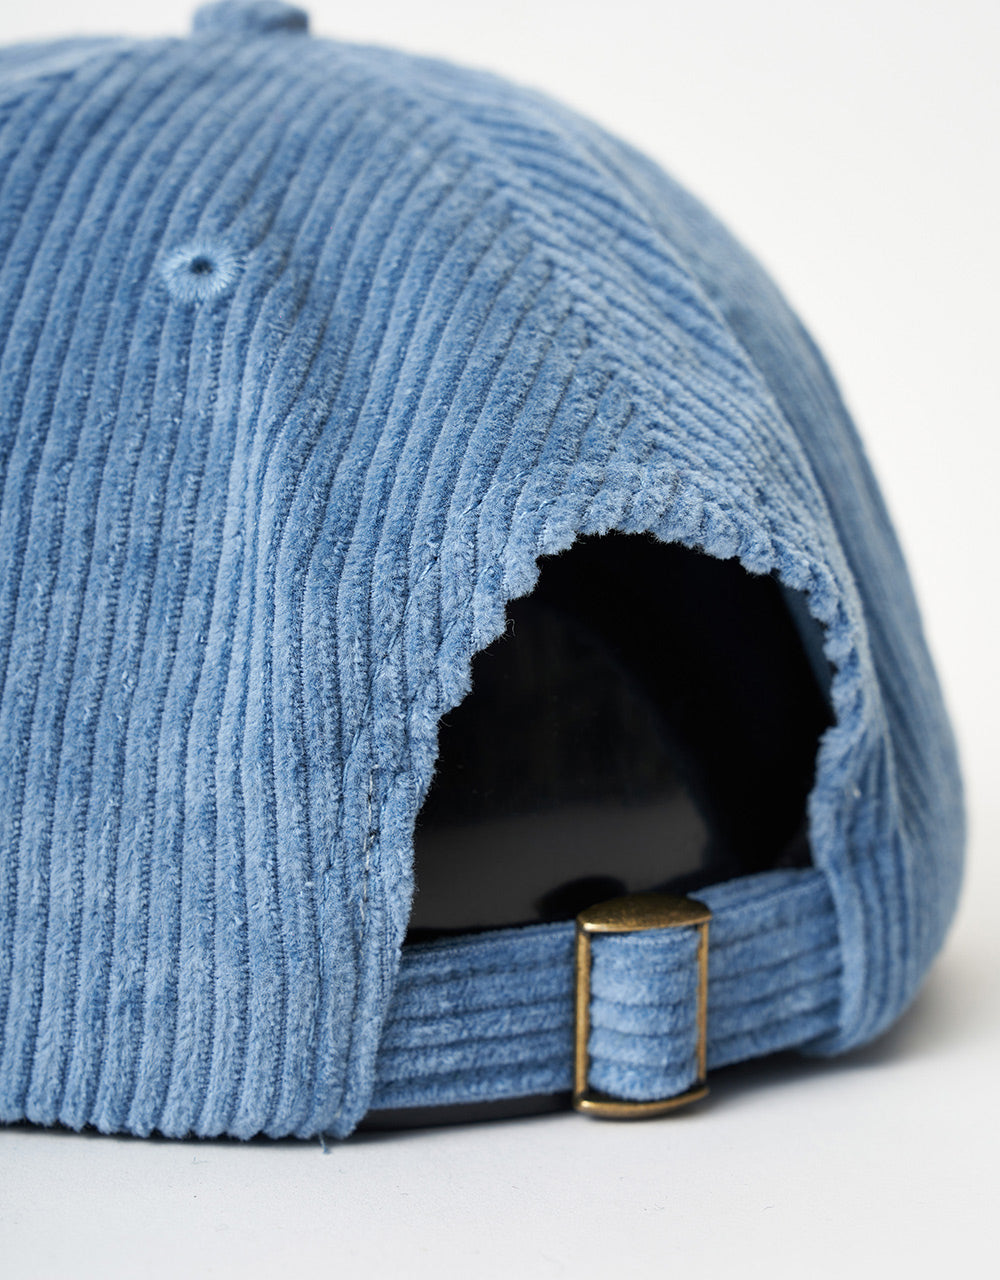 Route One Instand Unstructered 6 Panel Cord Cap-Stone Blue